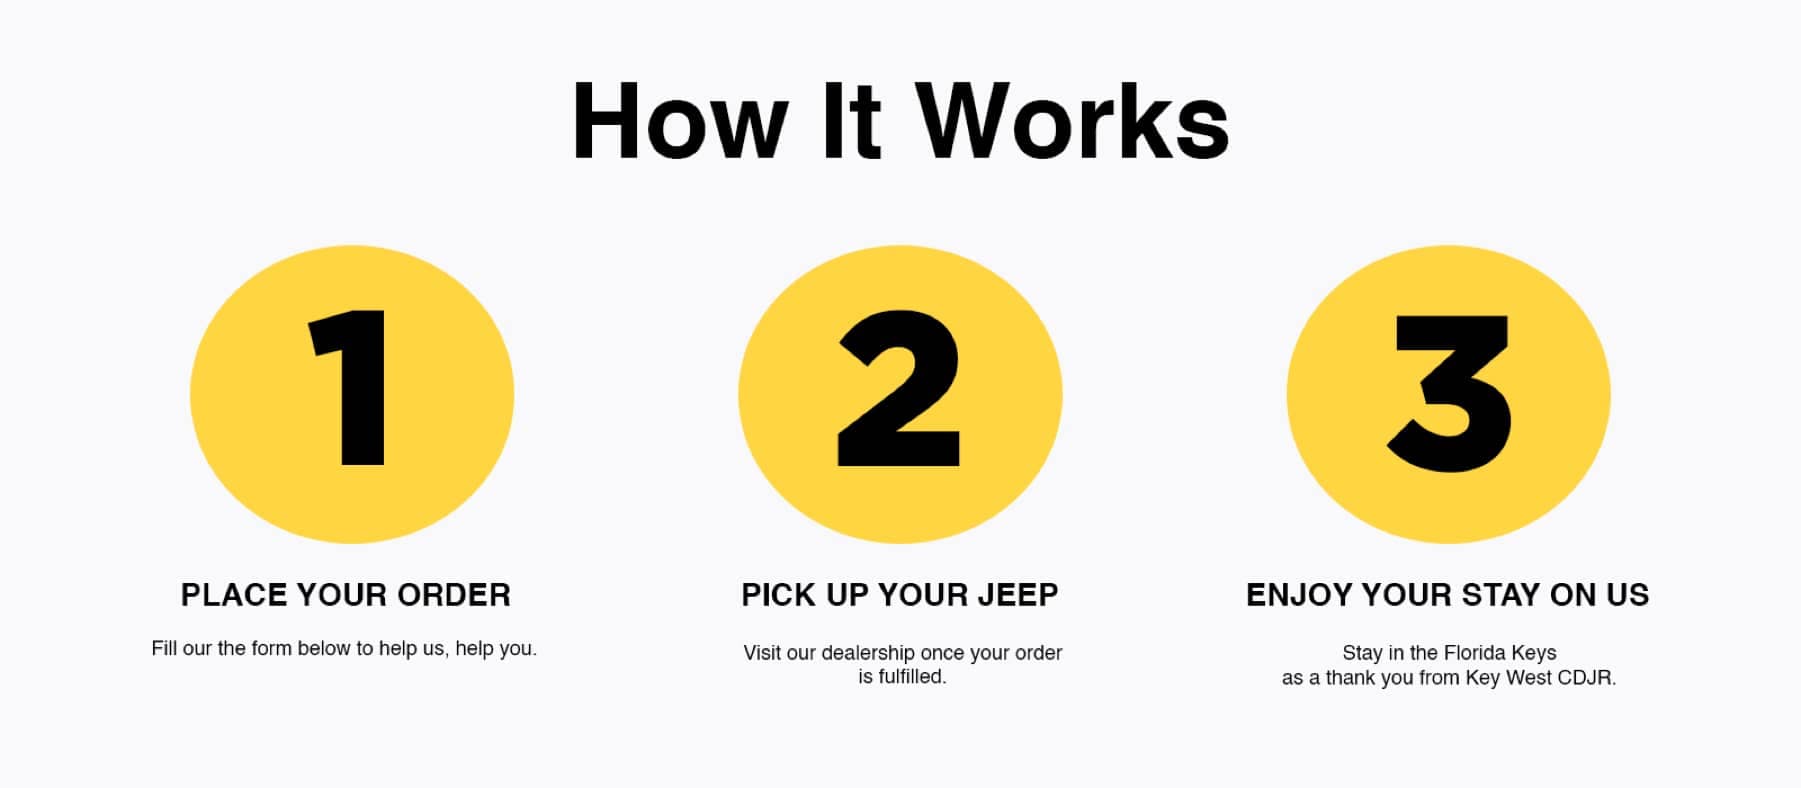 Order Your Jeep - 3 Steps